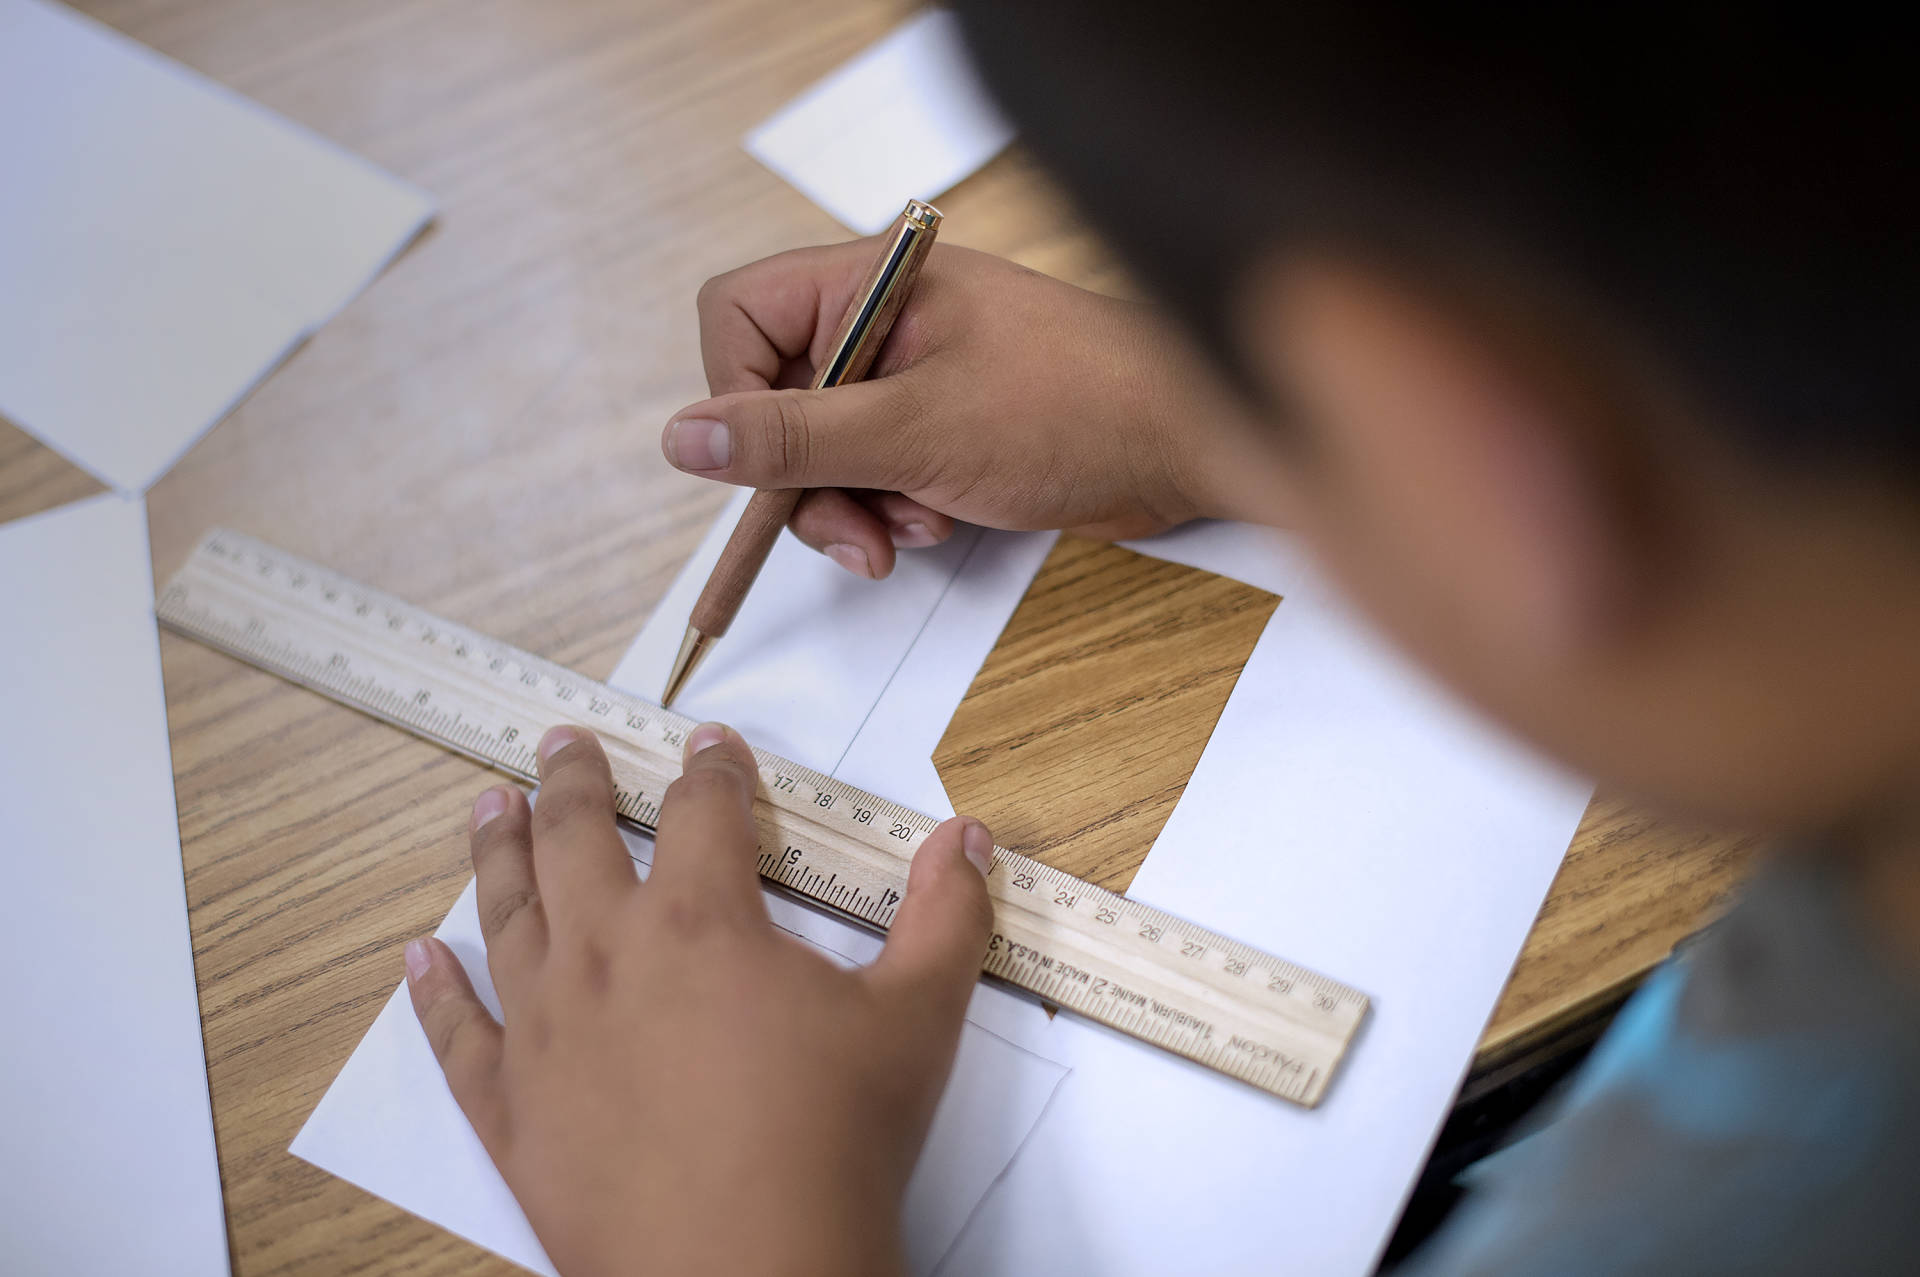 How ‘Productive Failure’ In Math Class Helps Make Lessons Stick | MindShift | KQED News